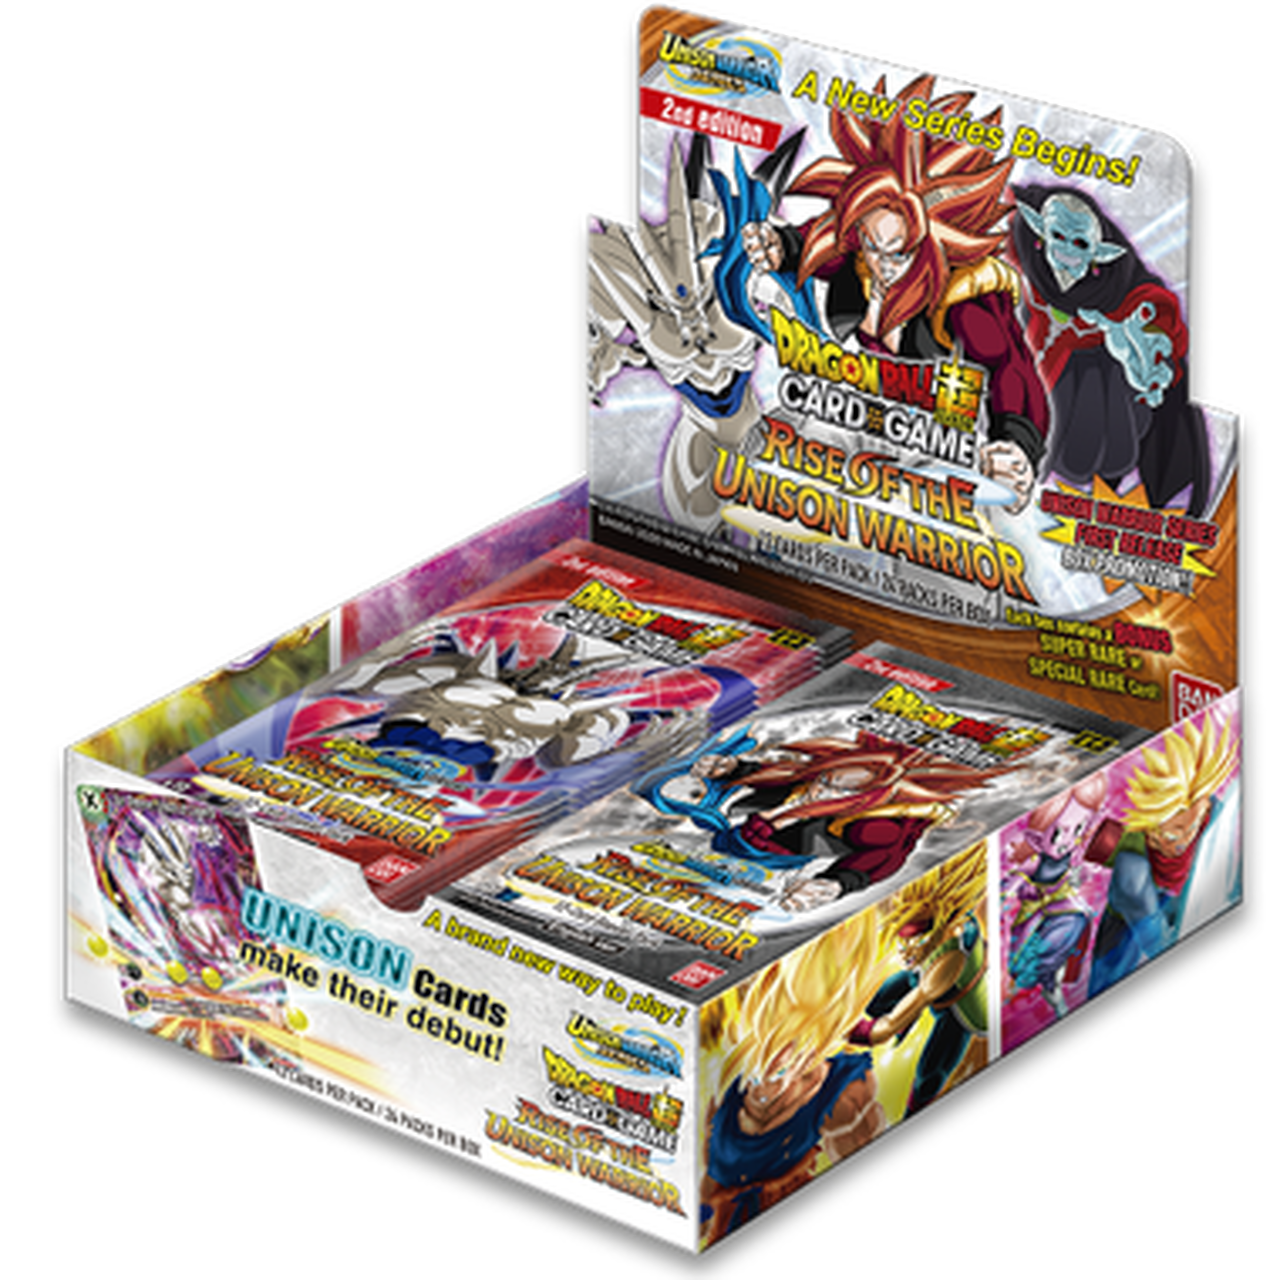 Dragon Ball Super Card Game Rise of the Unison Warrior 2nd Edition Booster Box [DBS-B10] | Sanctuary Gaming